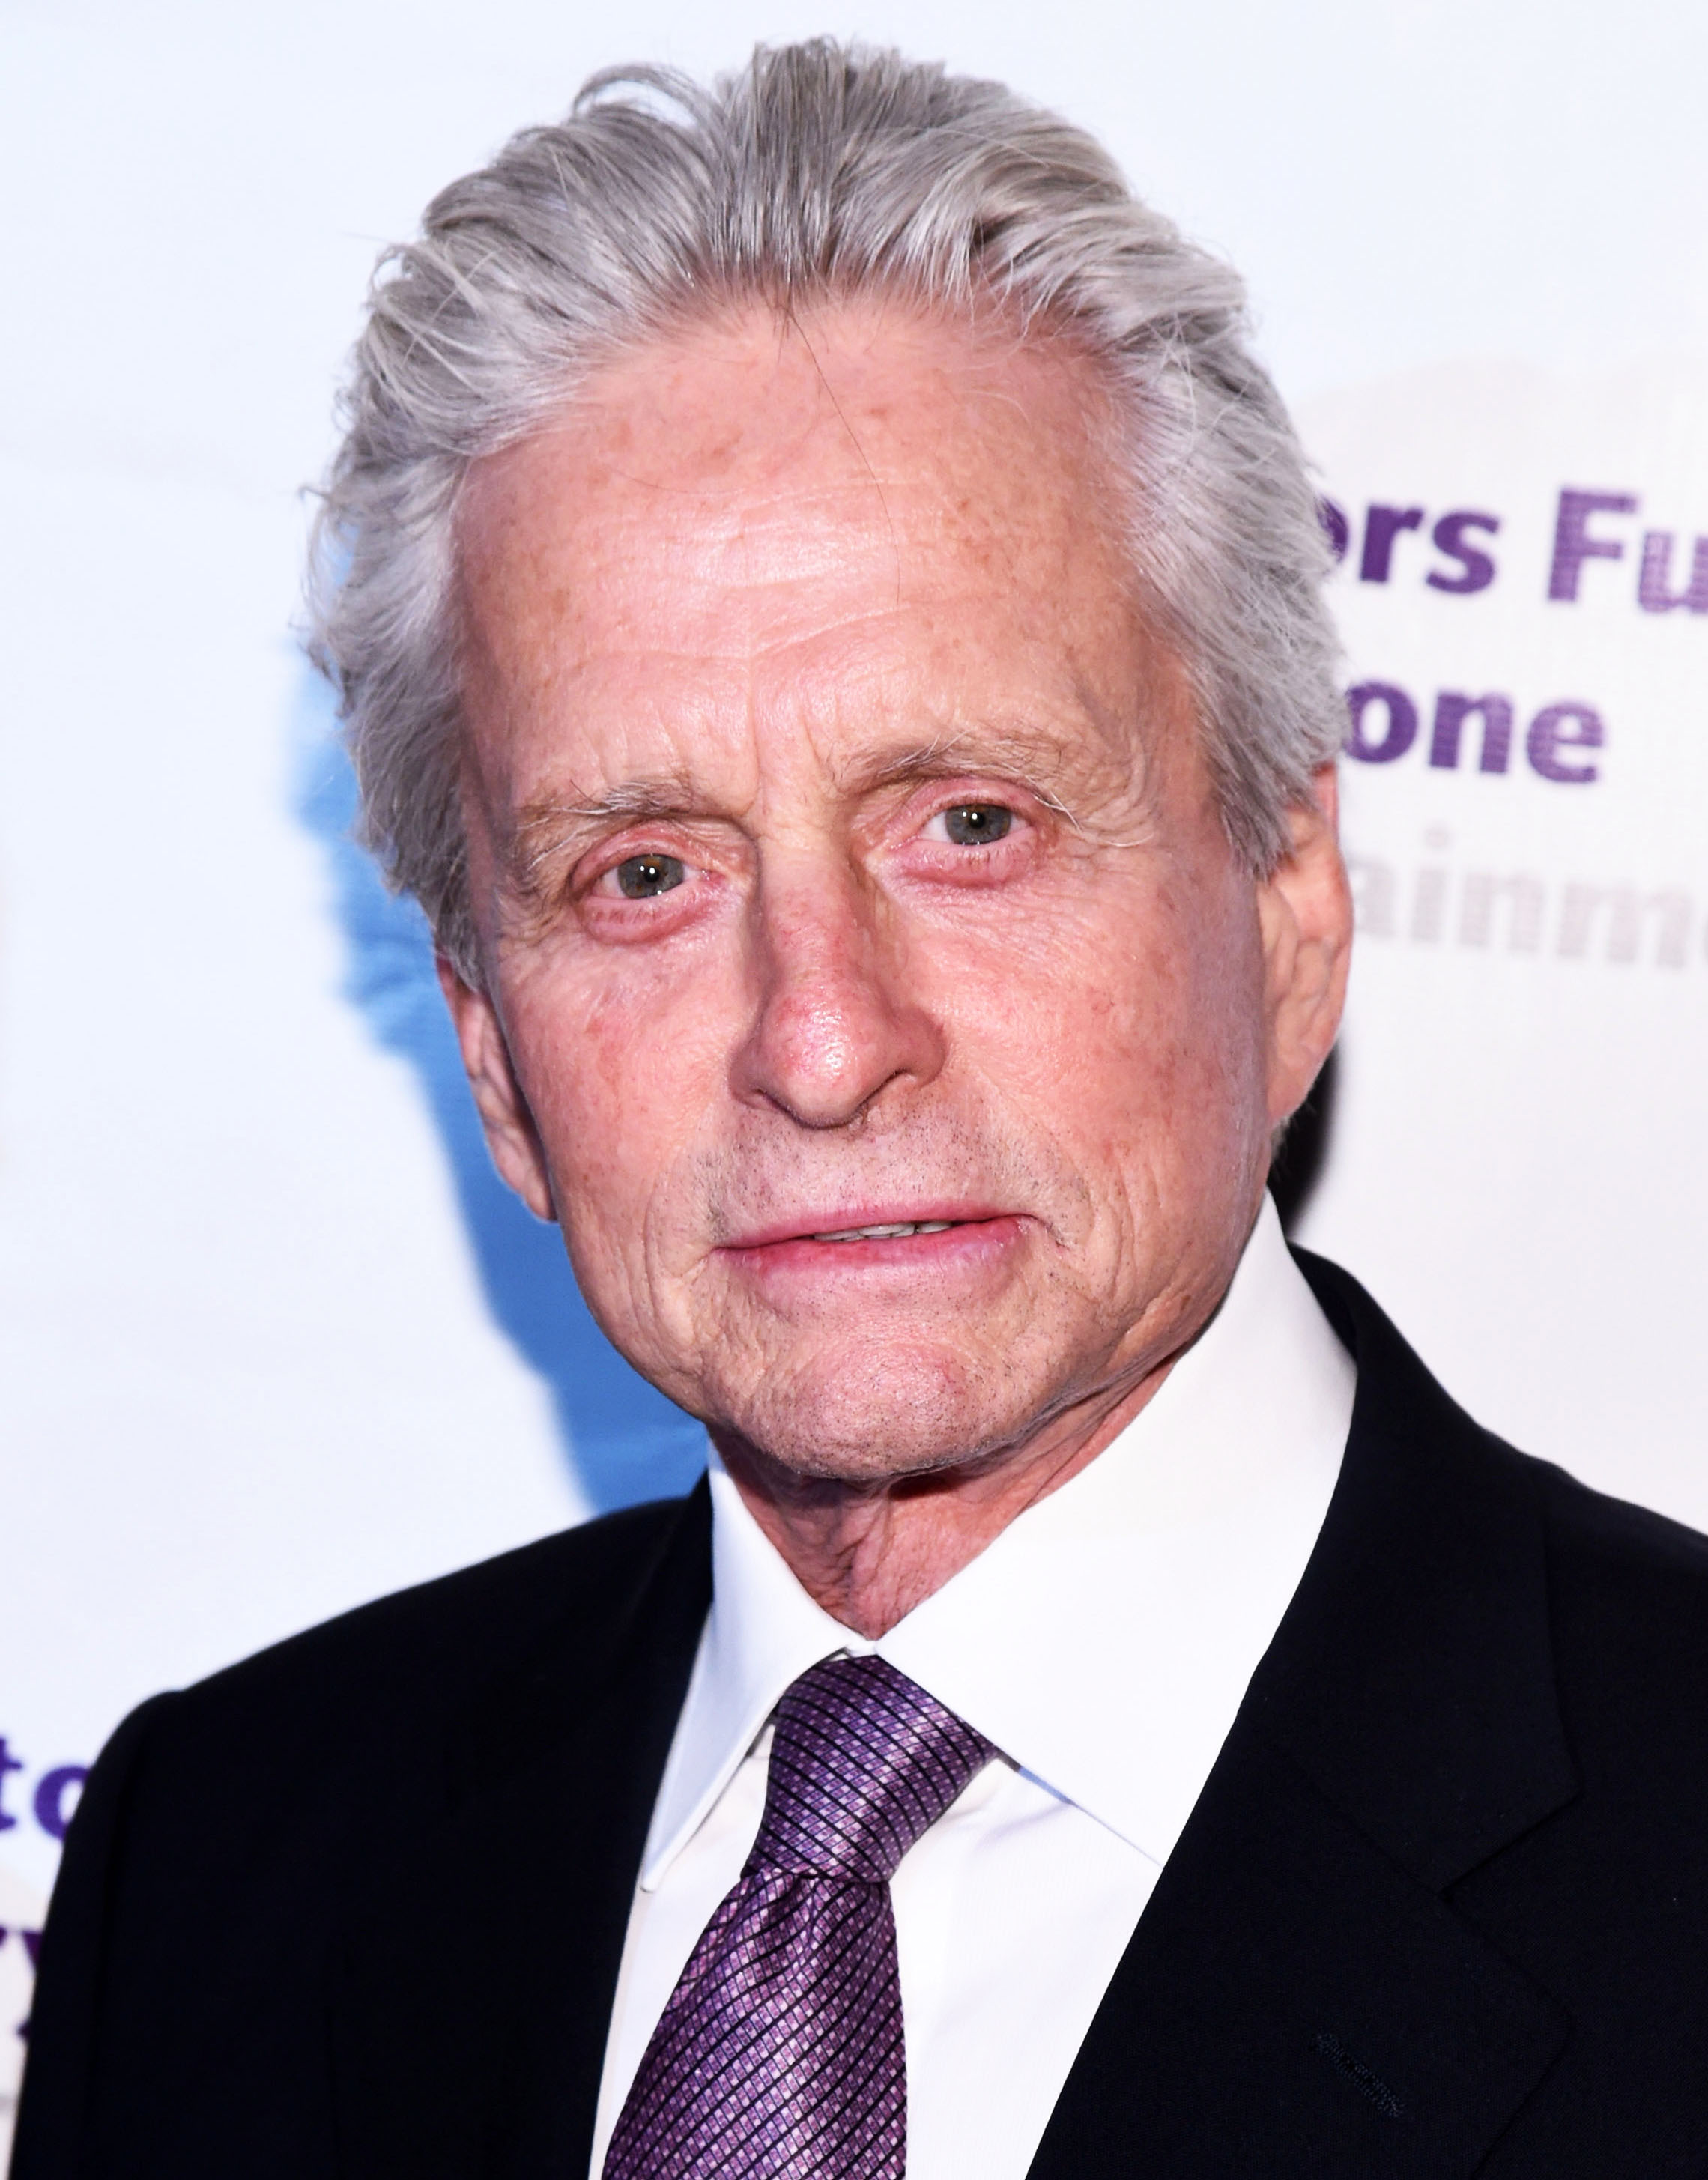 Michael Douglas May Be Going Blind From Tongue Cancer Treatments ...